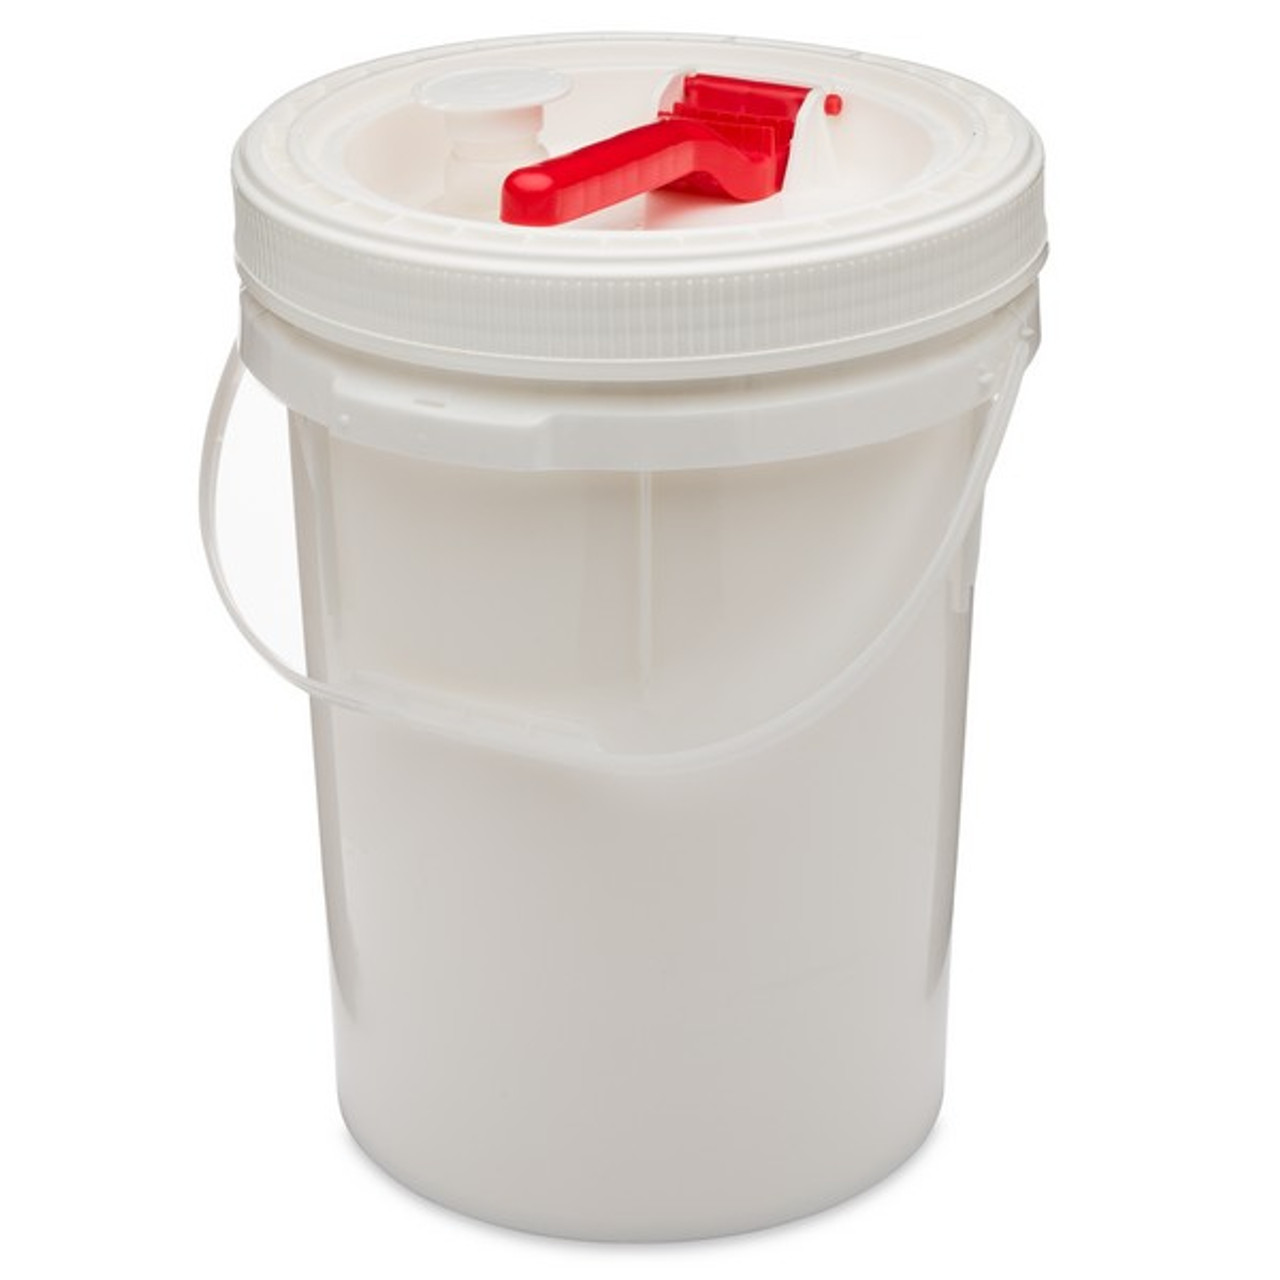 LIFE LATCH® NEW GENERATION 5 GALLON PLASTIC PAIL WITH RED SCREW TOP LID –  WHITE